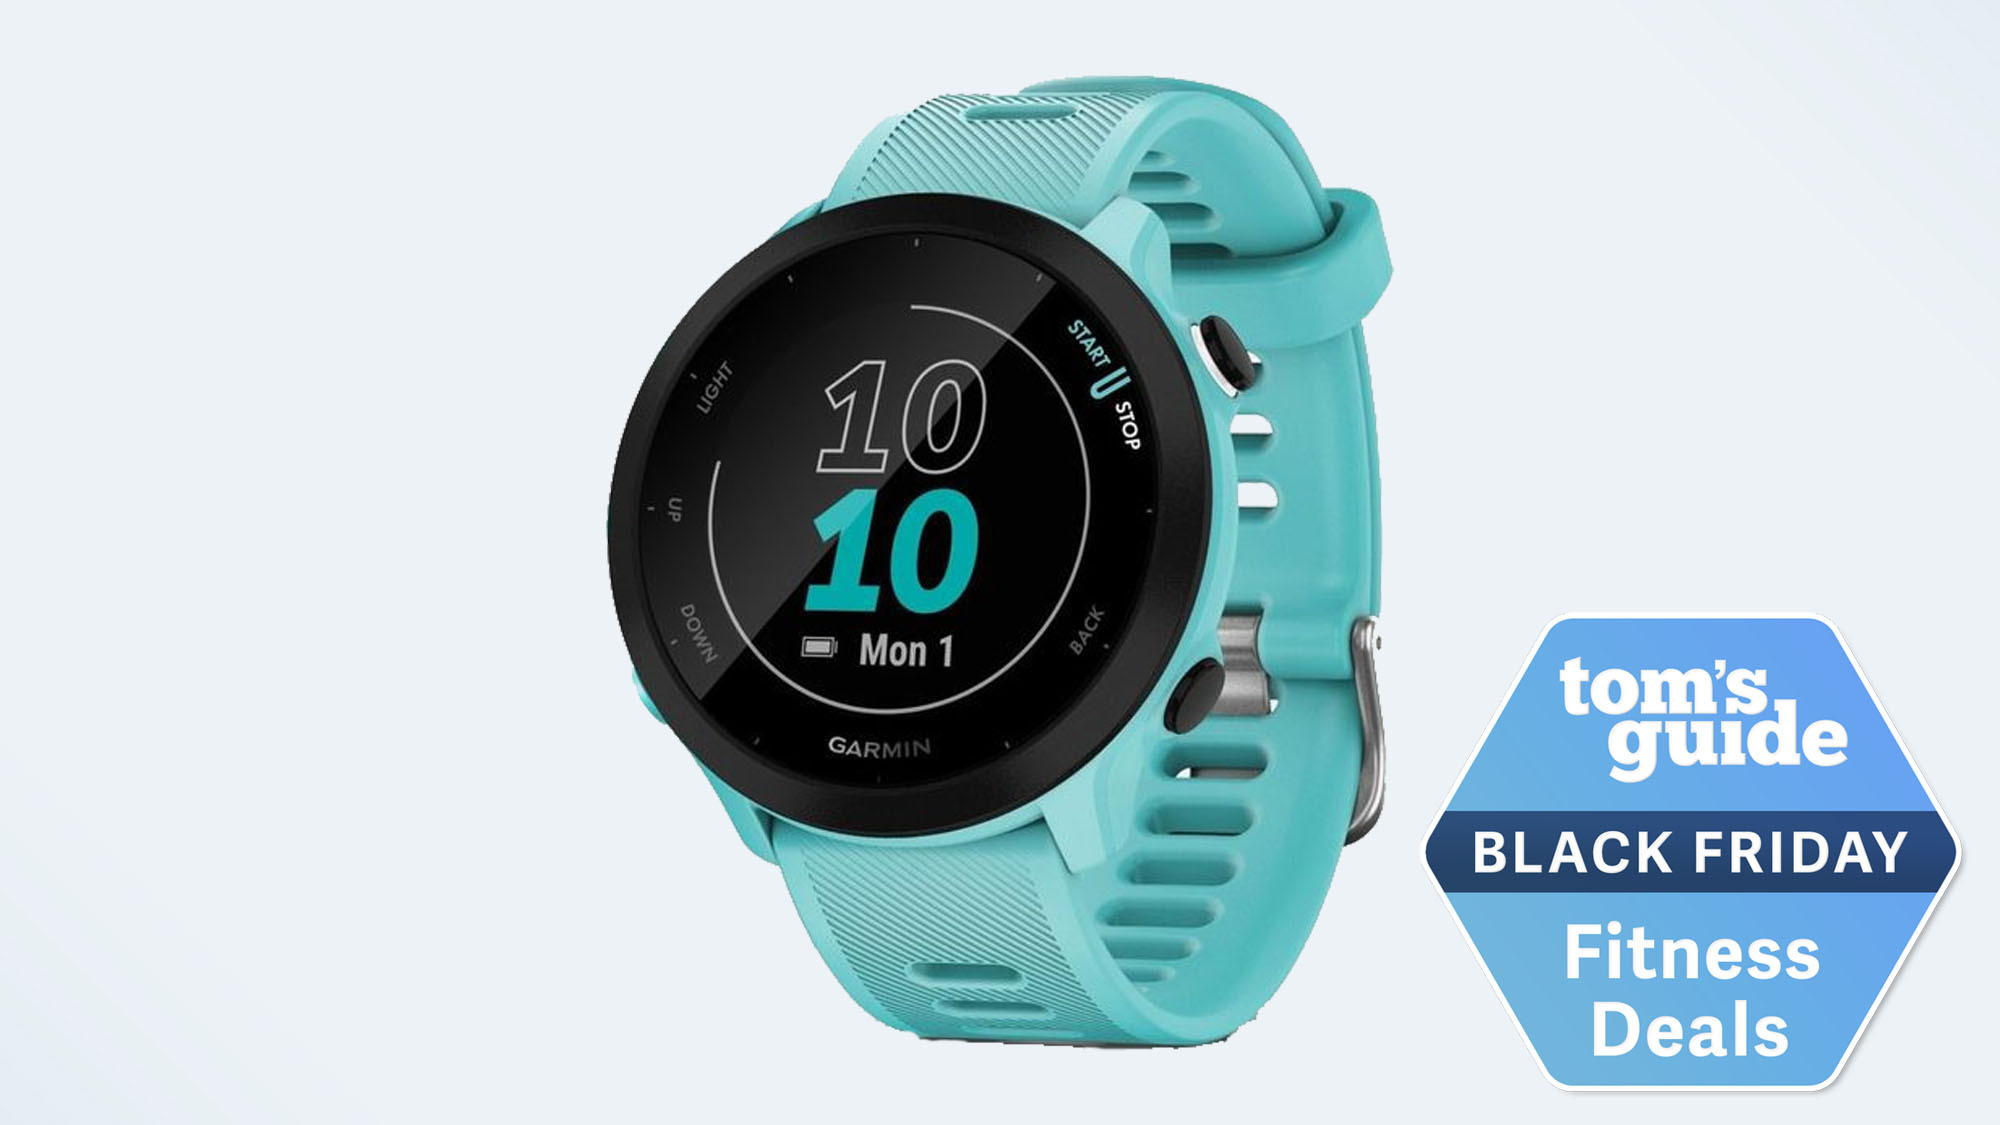 Stressing out? Let this Garmin Black Friday deal for the